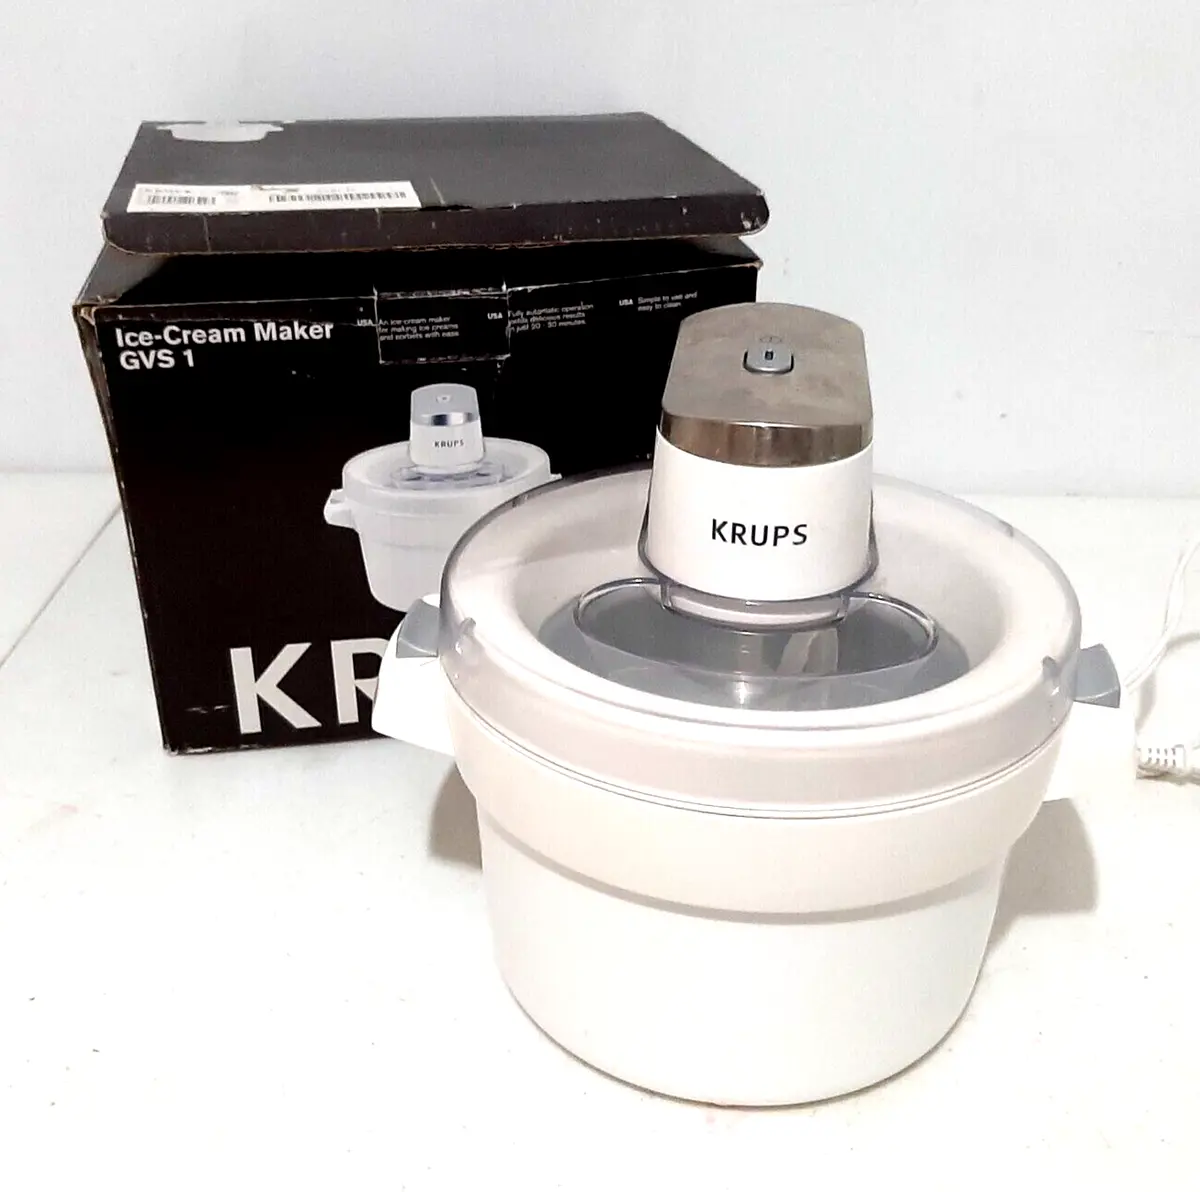 What Is The Liquid Inside A Krups Ice Cream Maker